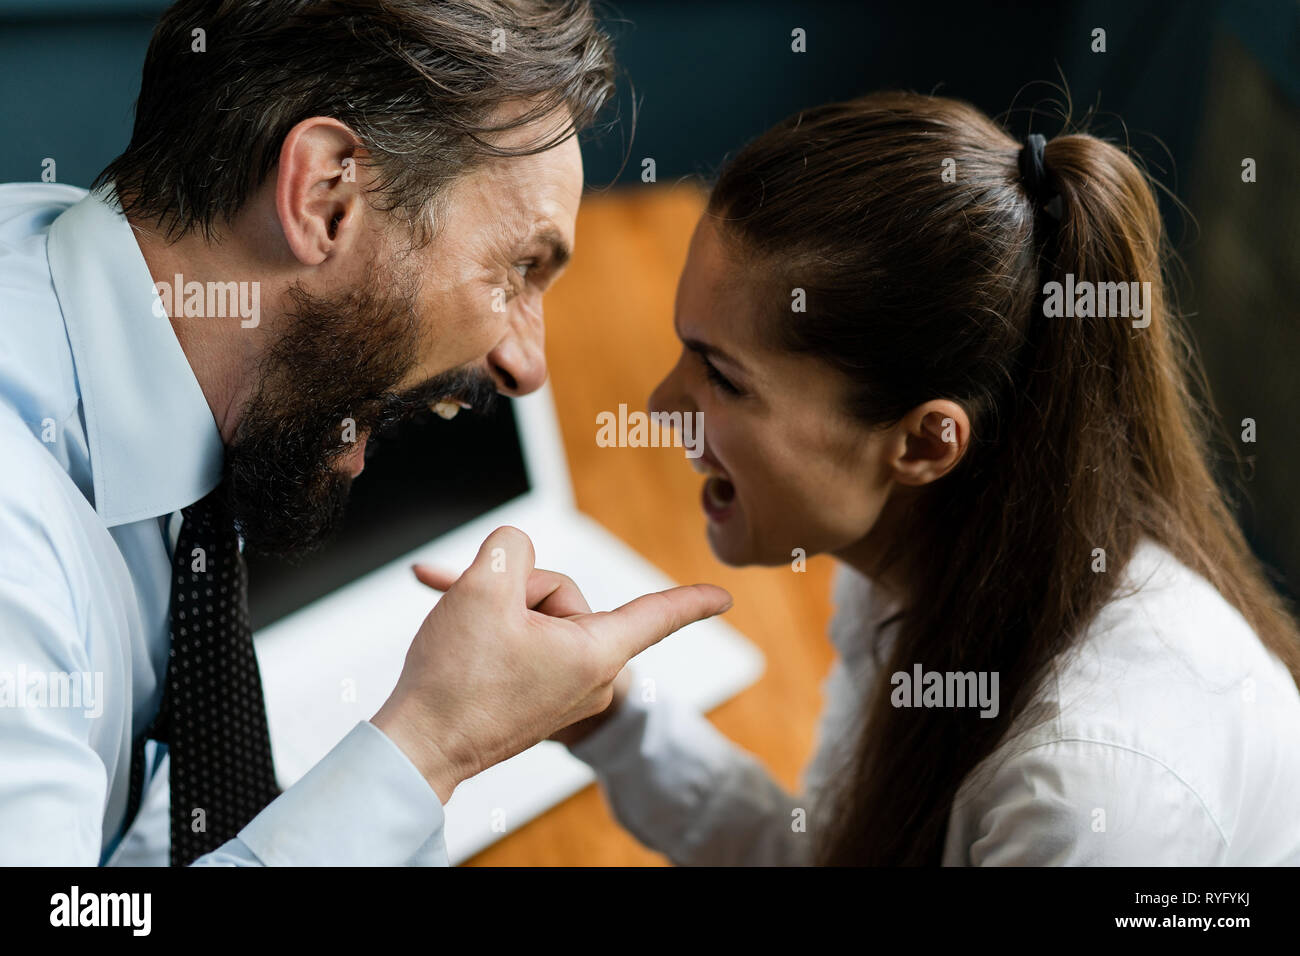 Business colleagues argue and yell at each other Stock Photo